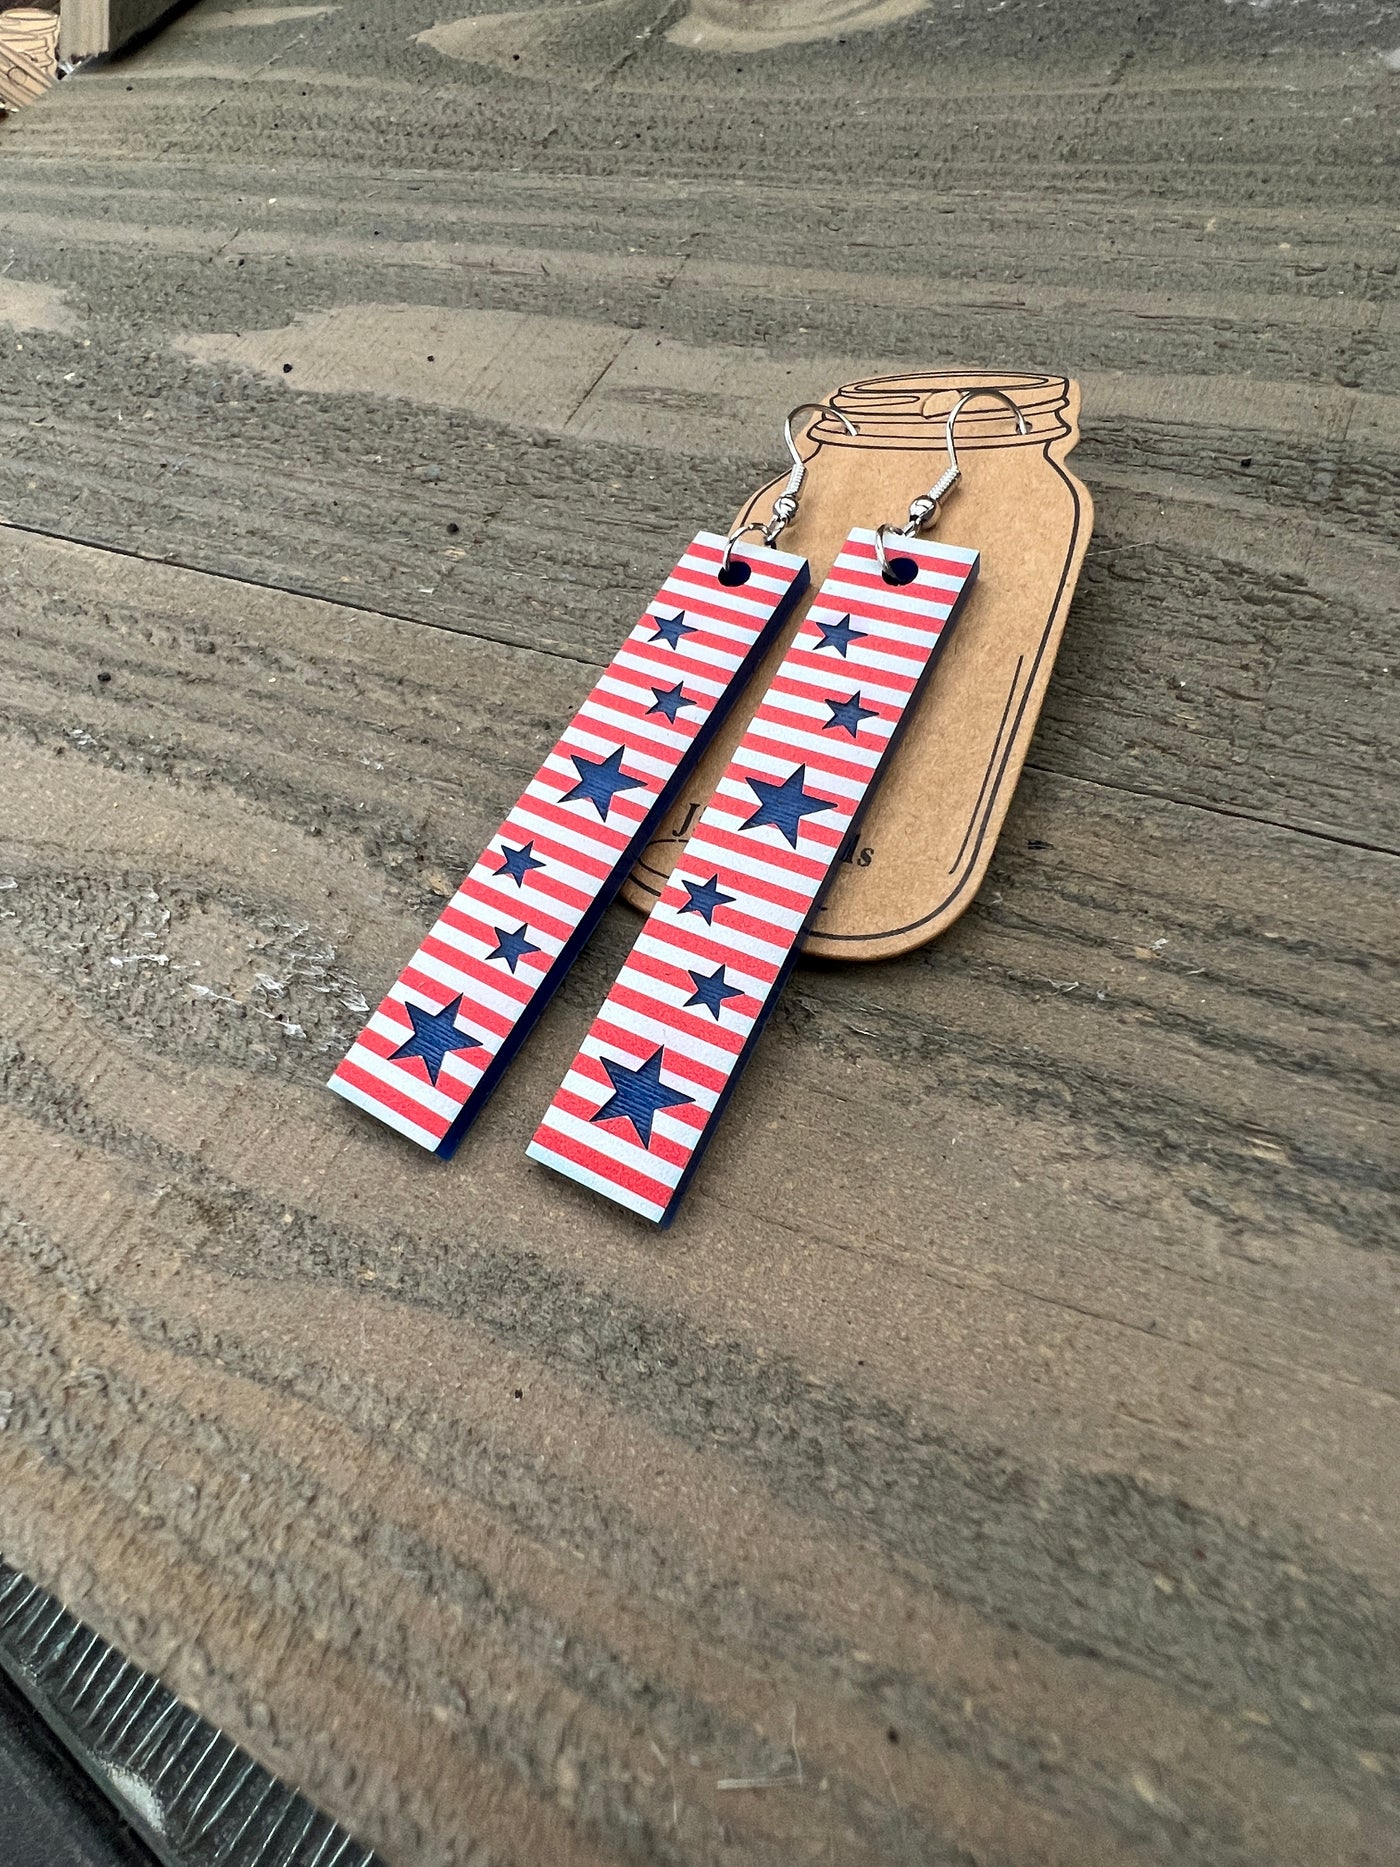 Blue Star Red and White Stripe USA Engraved Rectangle Cutout Earrings